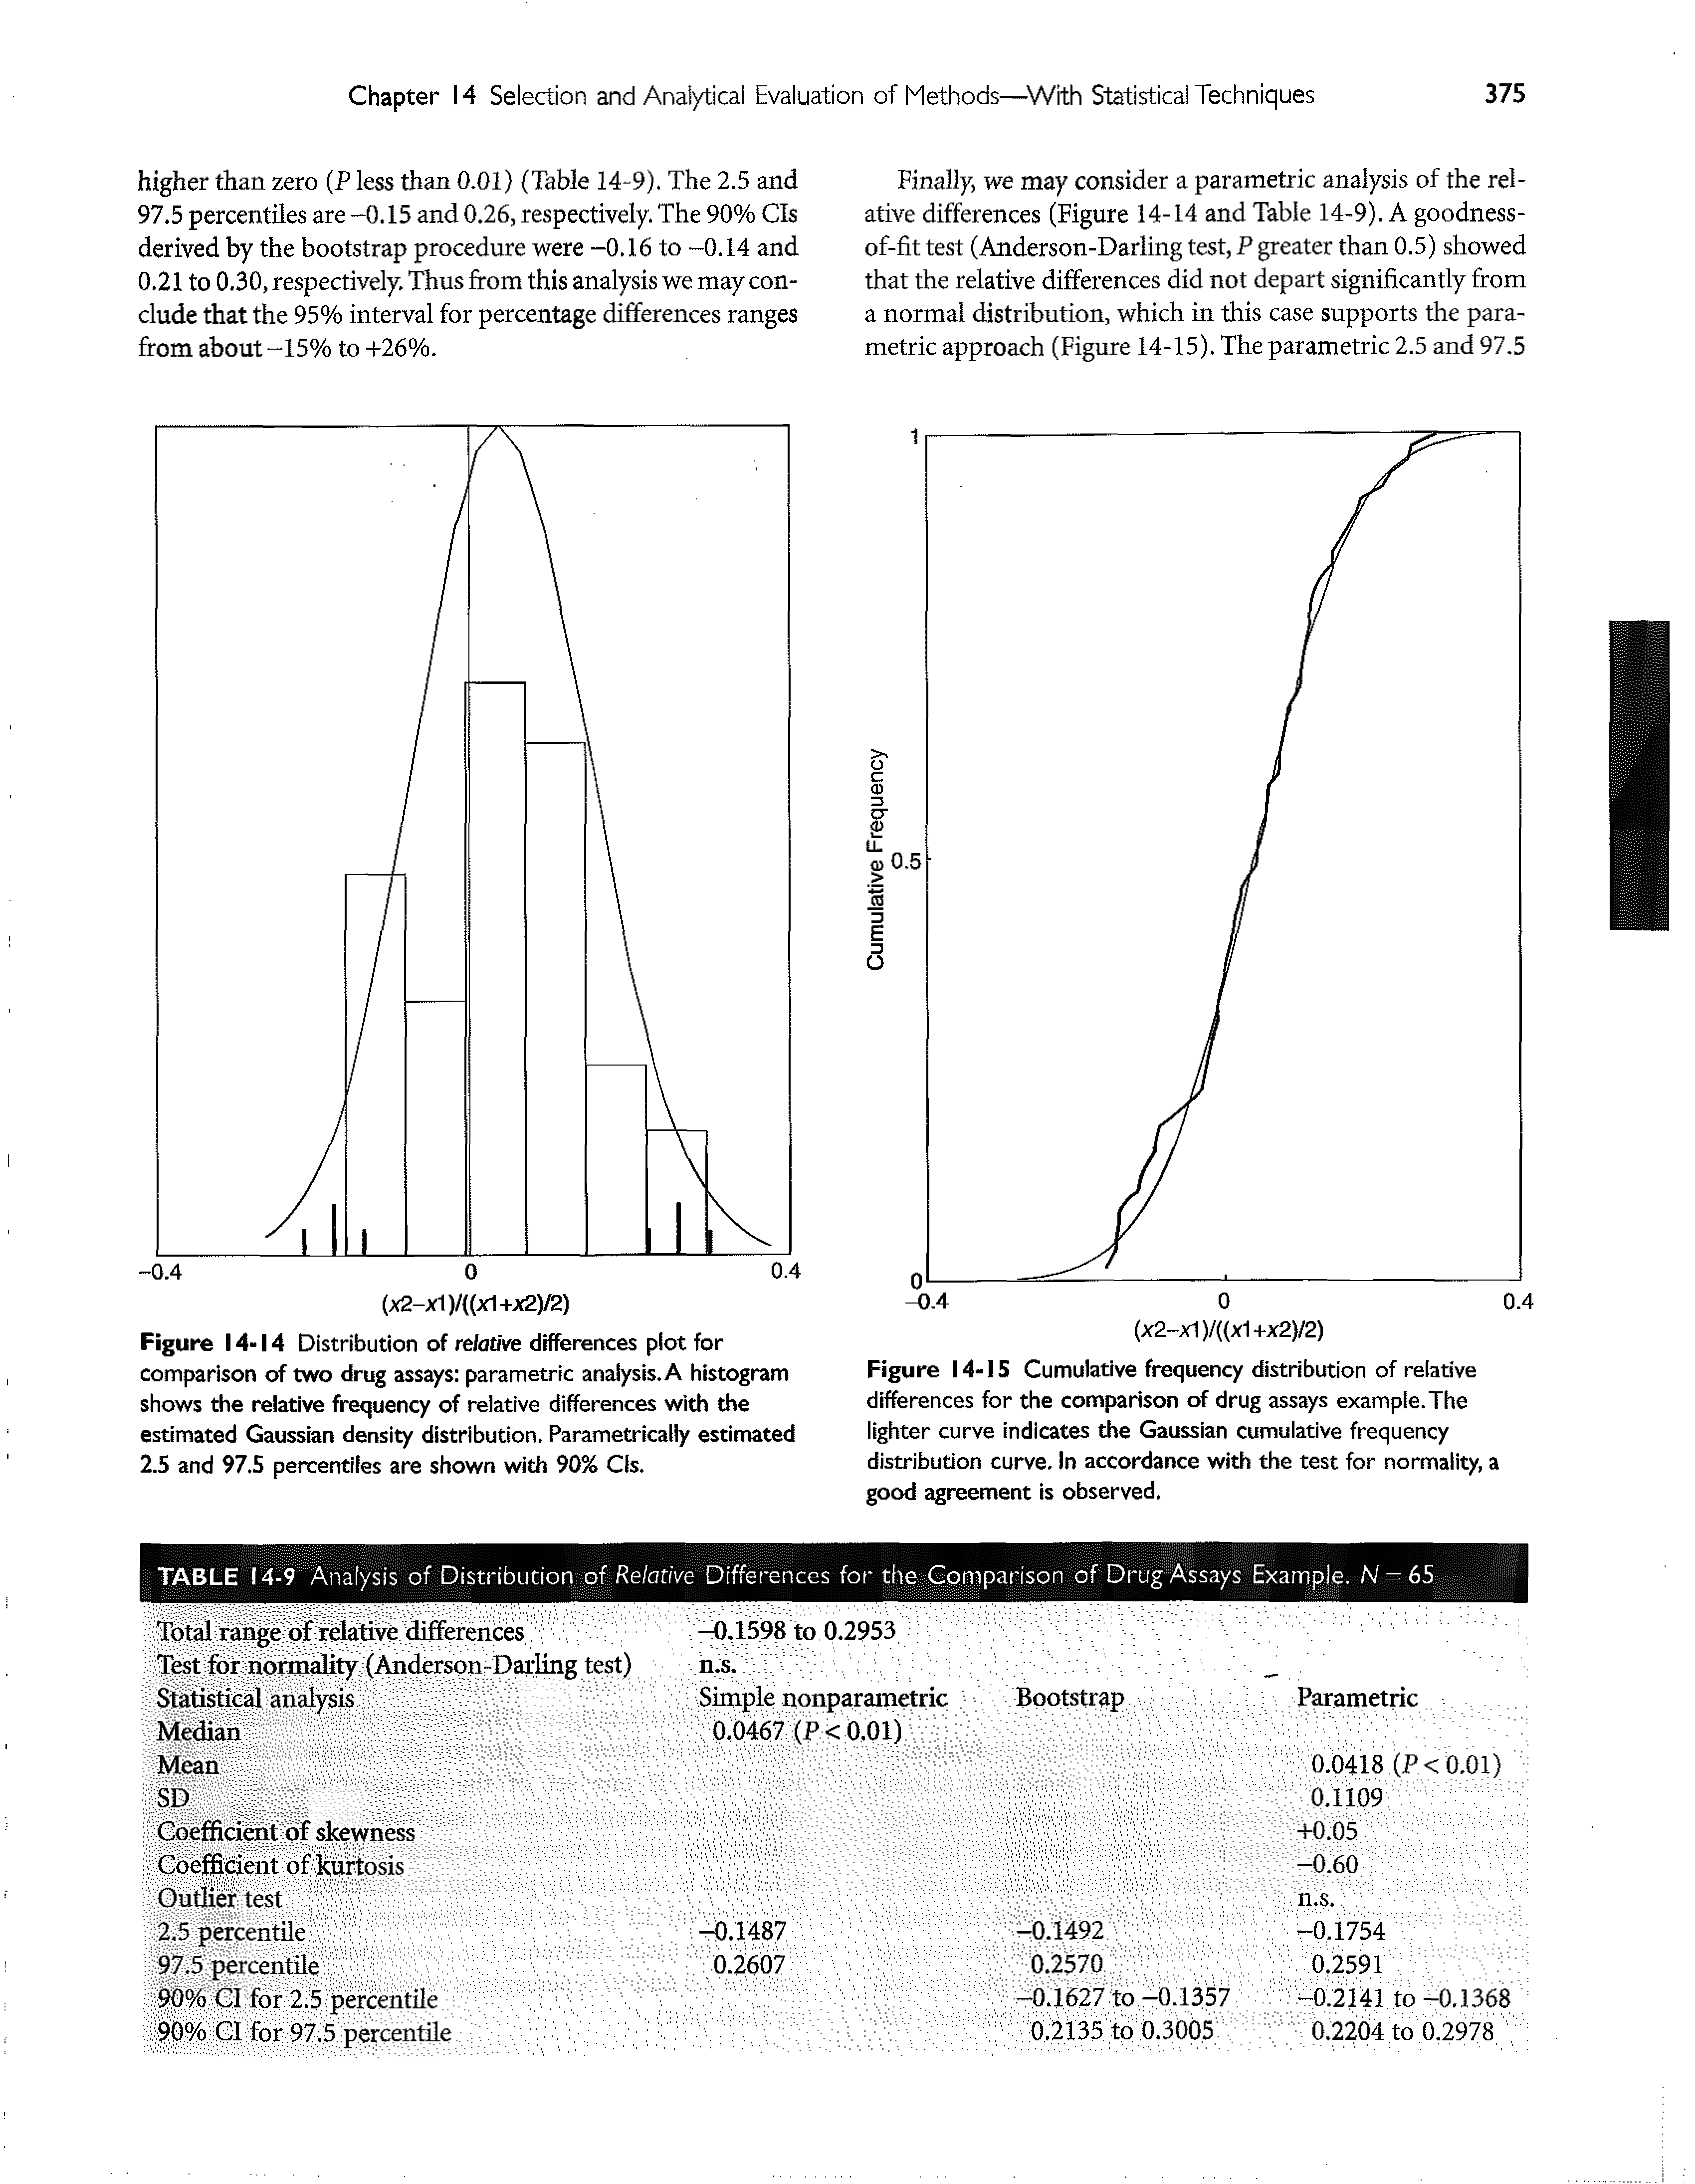 Figure 14-15 Cumulative frequency distribution of relative differences for the comparison of drug assays example.The lighter curve indicates the Gaussian cumulative frequency distribution curve. In accordance with the test for normality, a good agreement is observed.